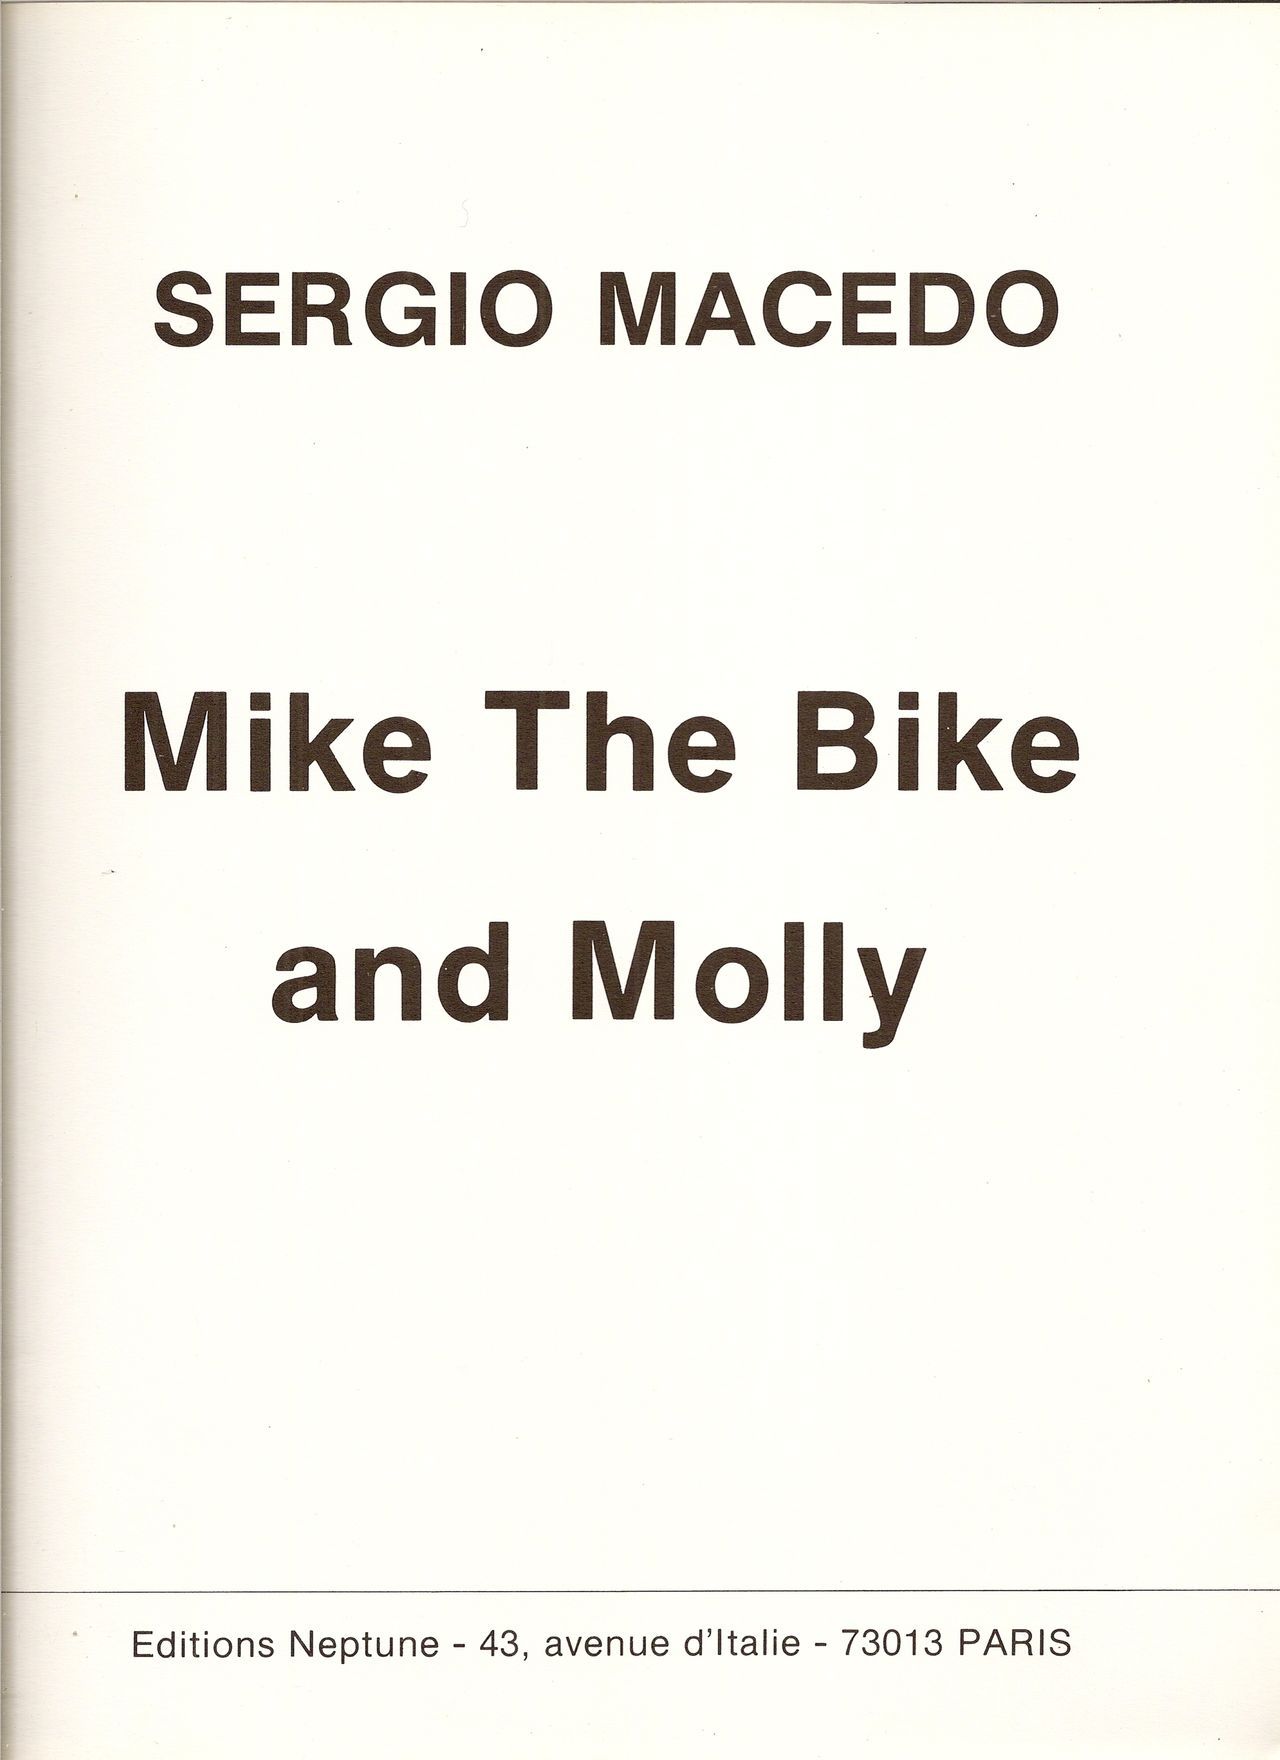 [Macedo] Mike the Bike & Molly (les aventures de)[French] 2